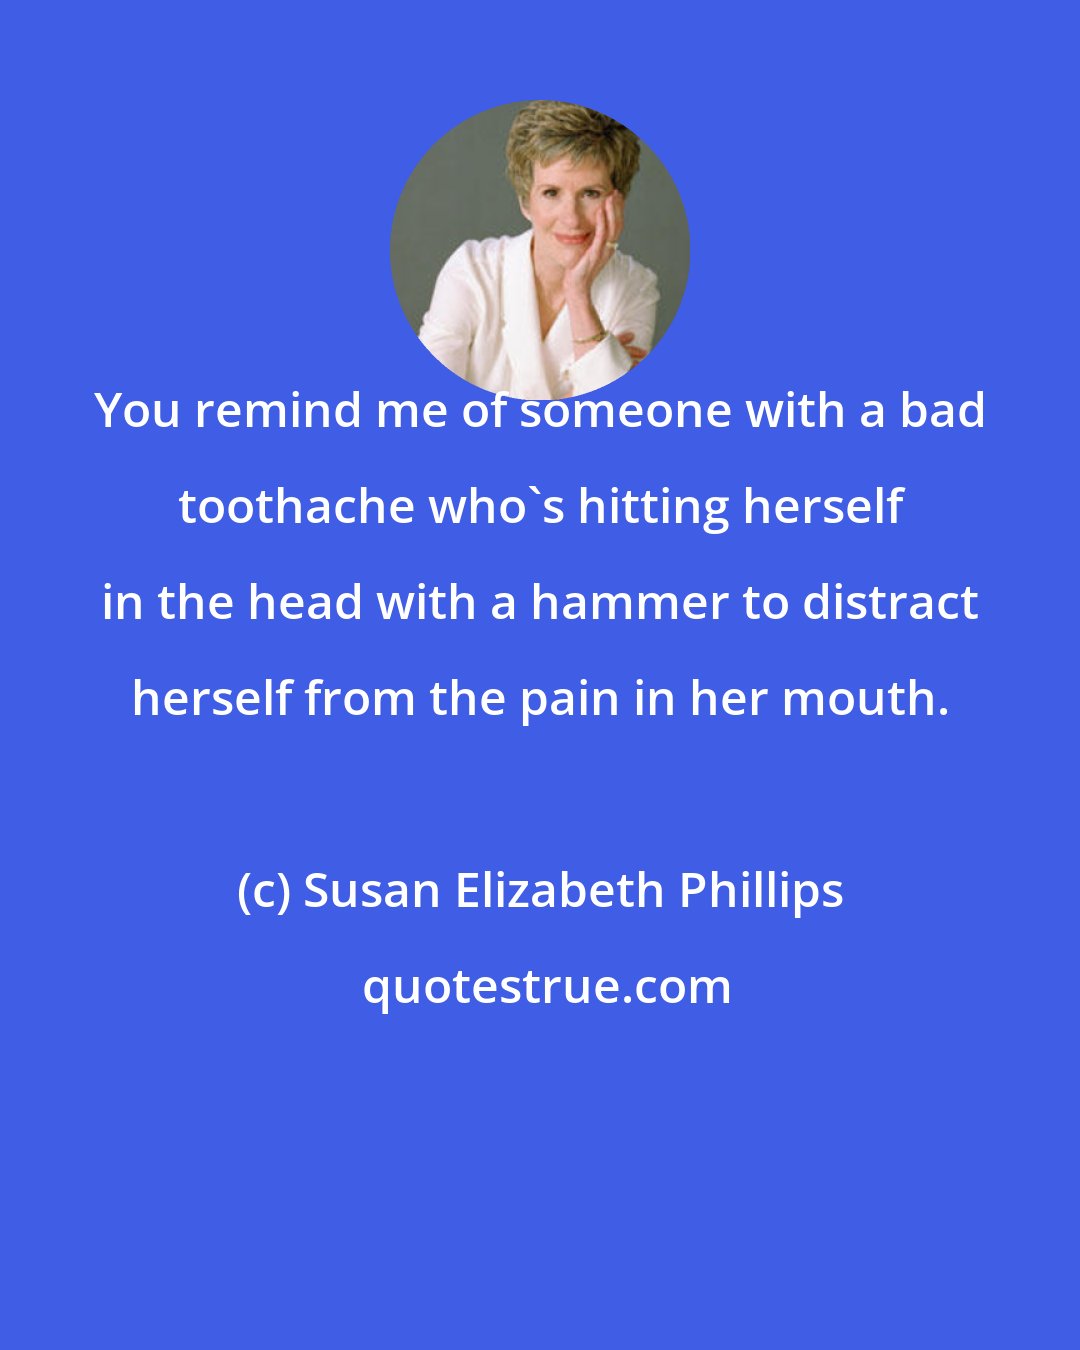 Susan Elizabeth Phillips: You remind me of someone with a bad toothache who's hitting herself in the head with a hammer to distract herself from the pain in her mouth.